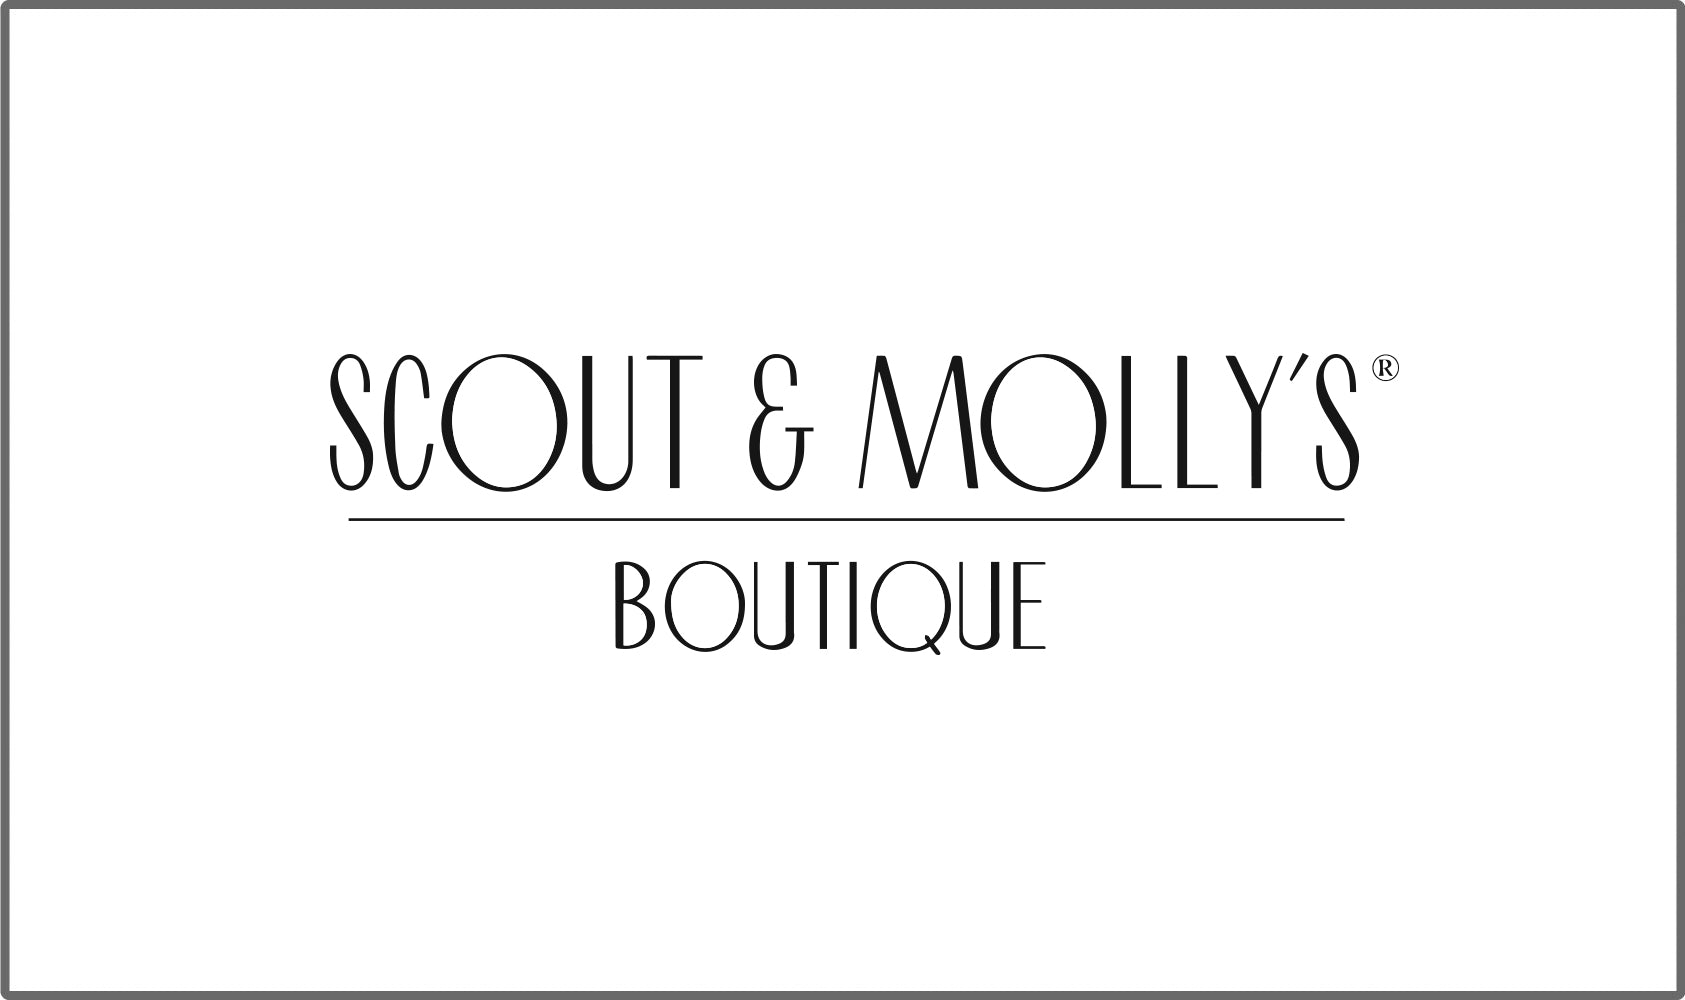 AllRetailers_BW_SCOUT_and_MOLLYS.jpg